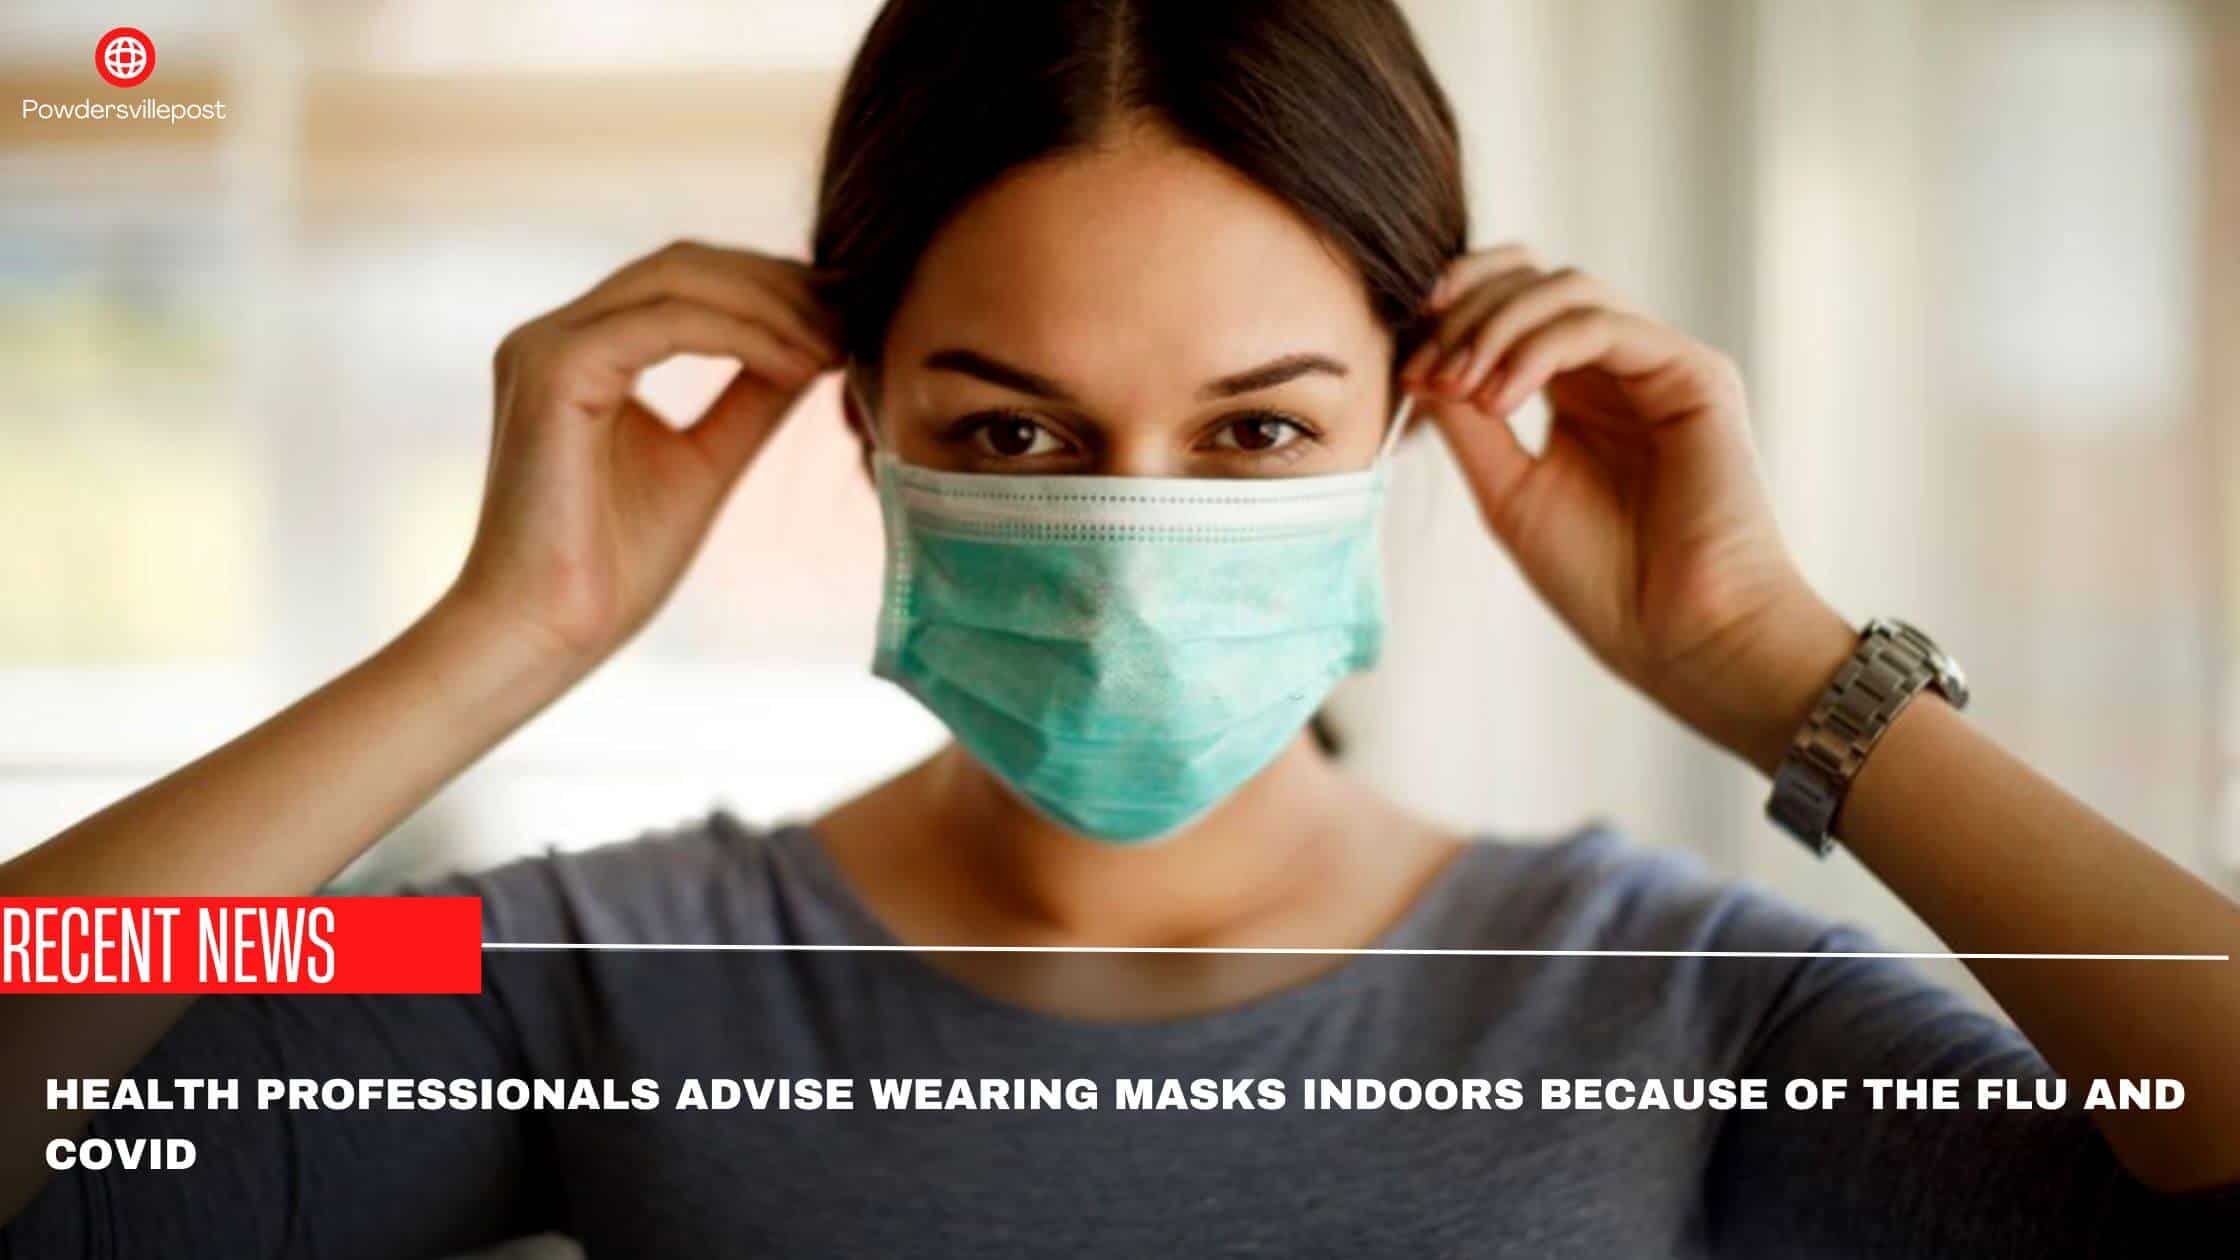 Health Professionals Advise Wearing Masks Indoors Because Of The Flu And Covid